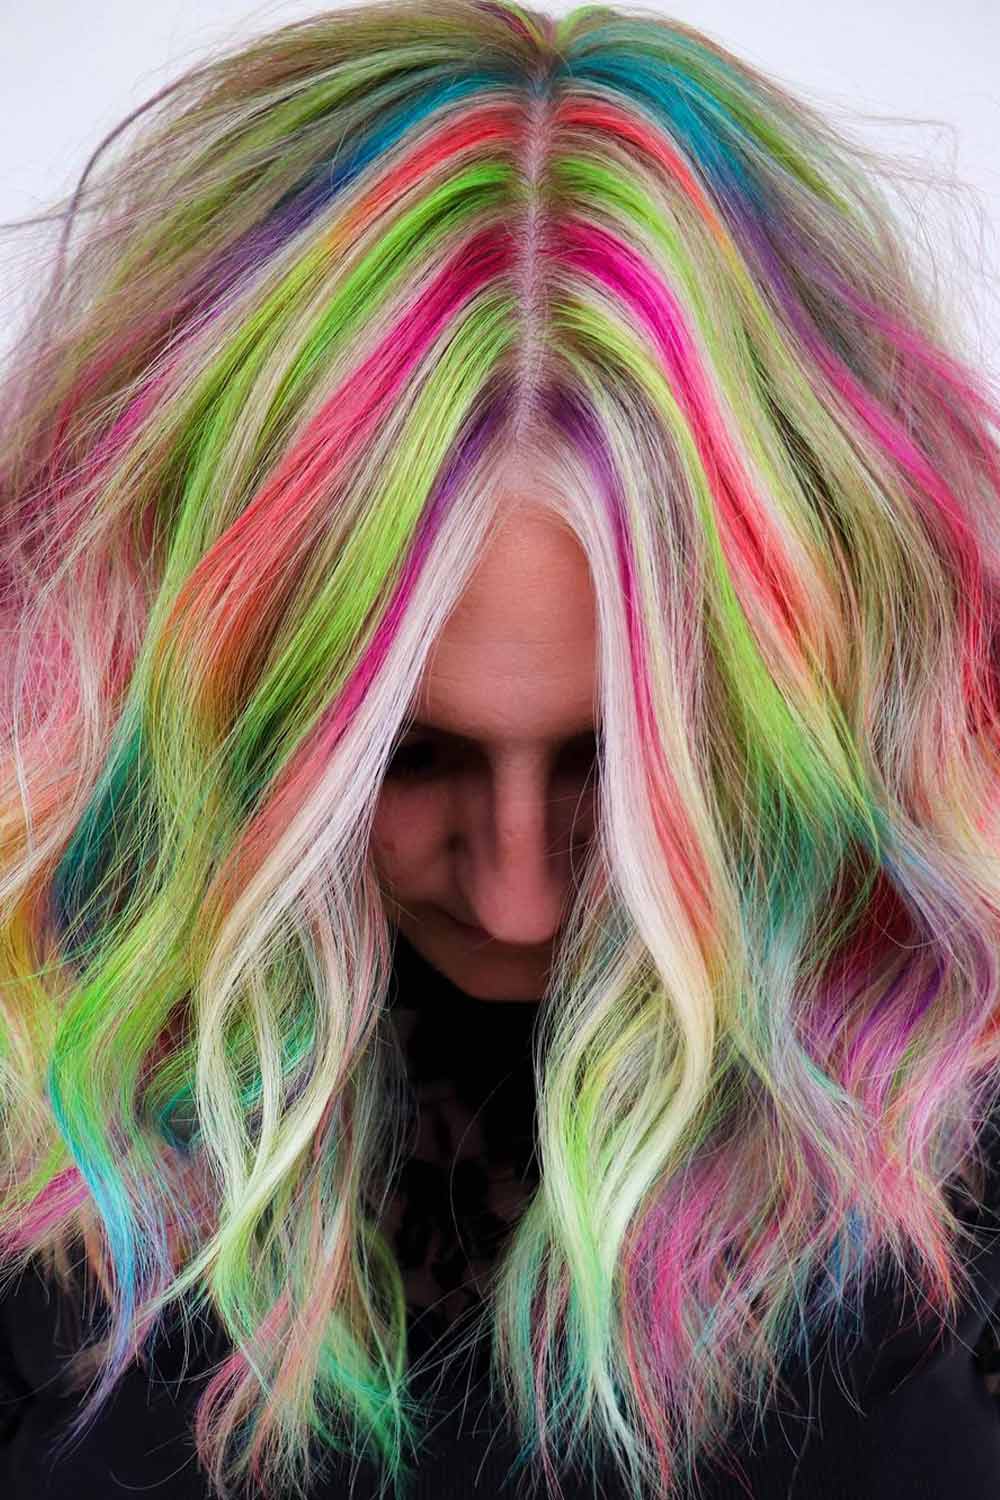 High Contrast Neon Rainbow with Blonde Hair